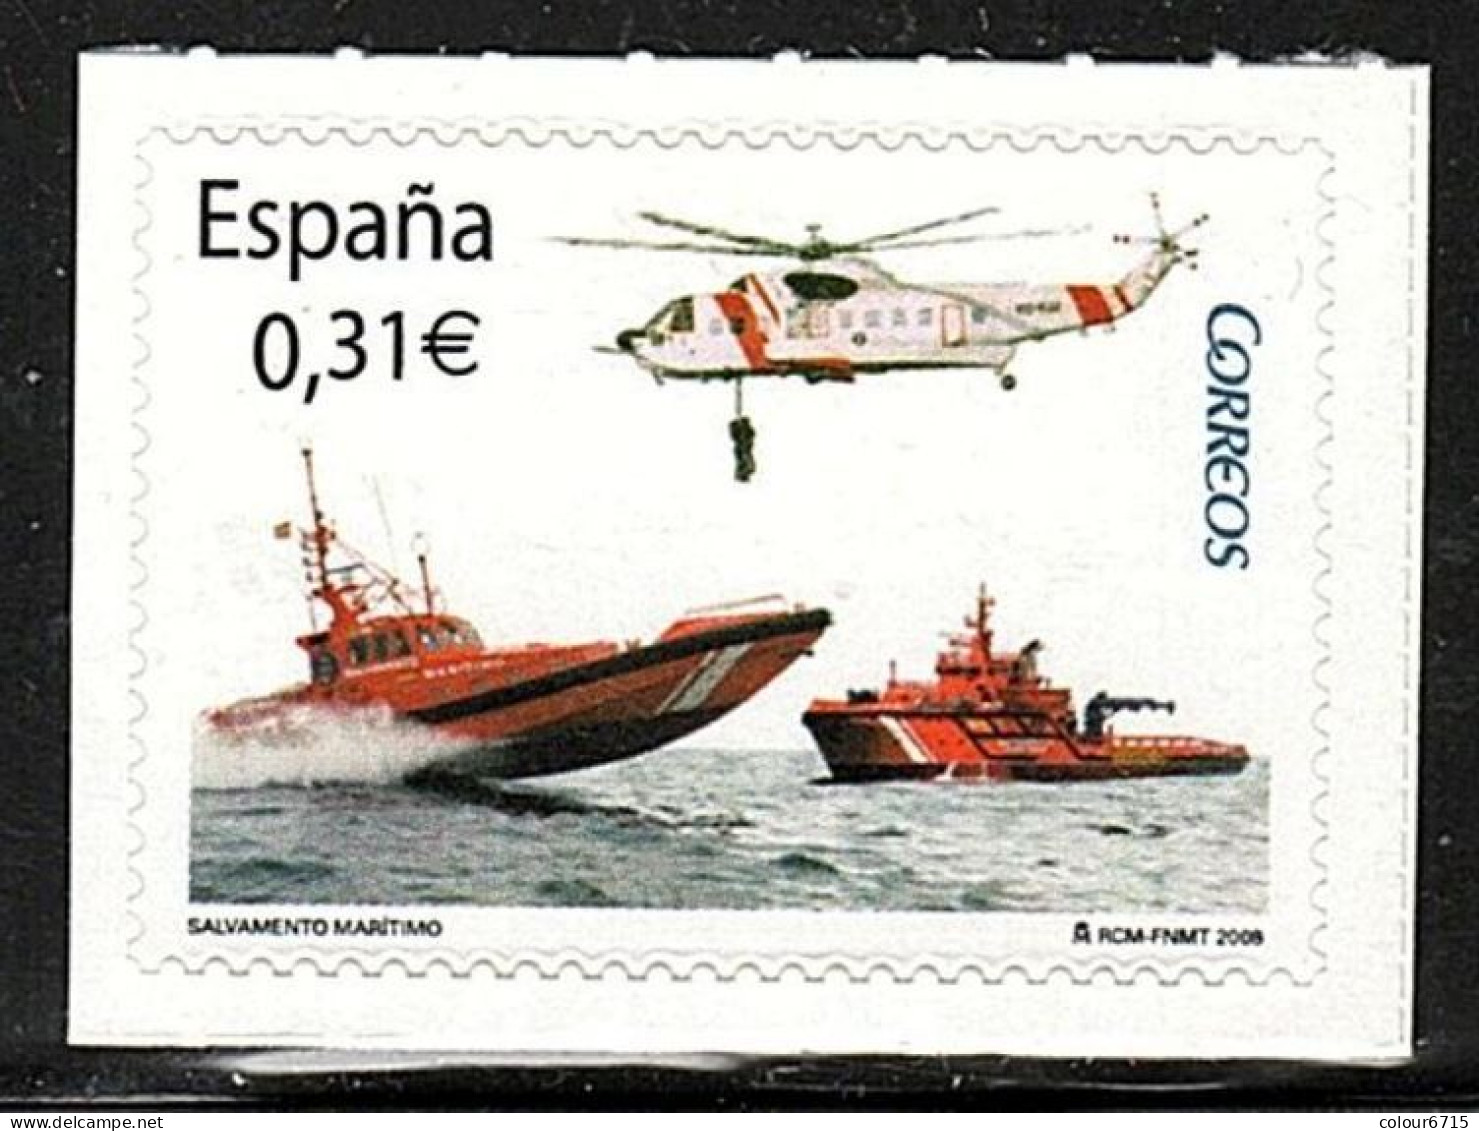 Spain 2008 Maritime Rescue - Self-Adhesive Stamp 1v MNH - Nuevos